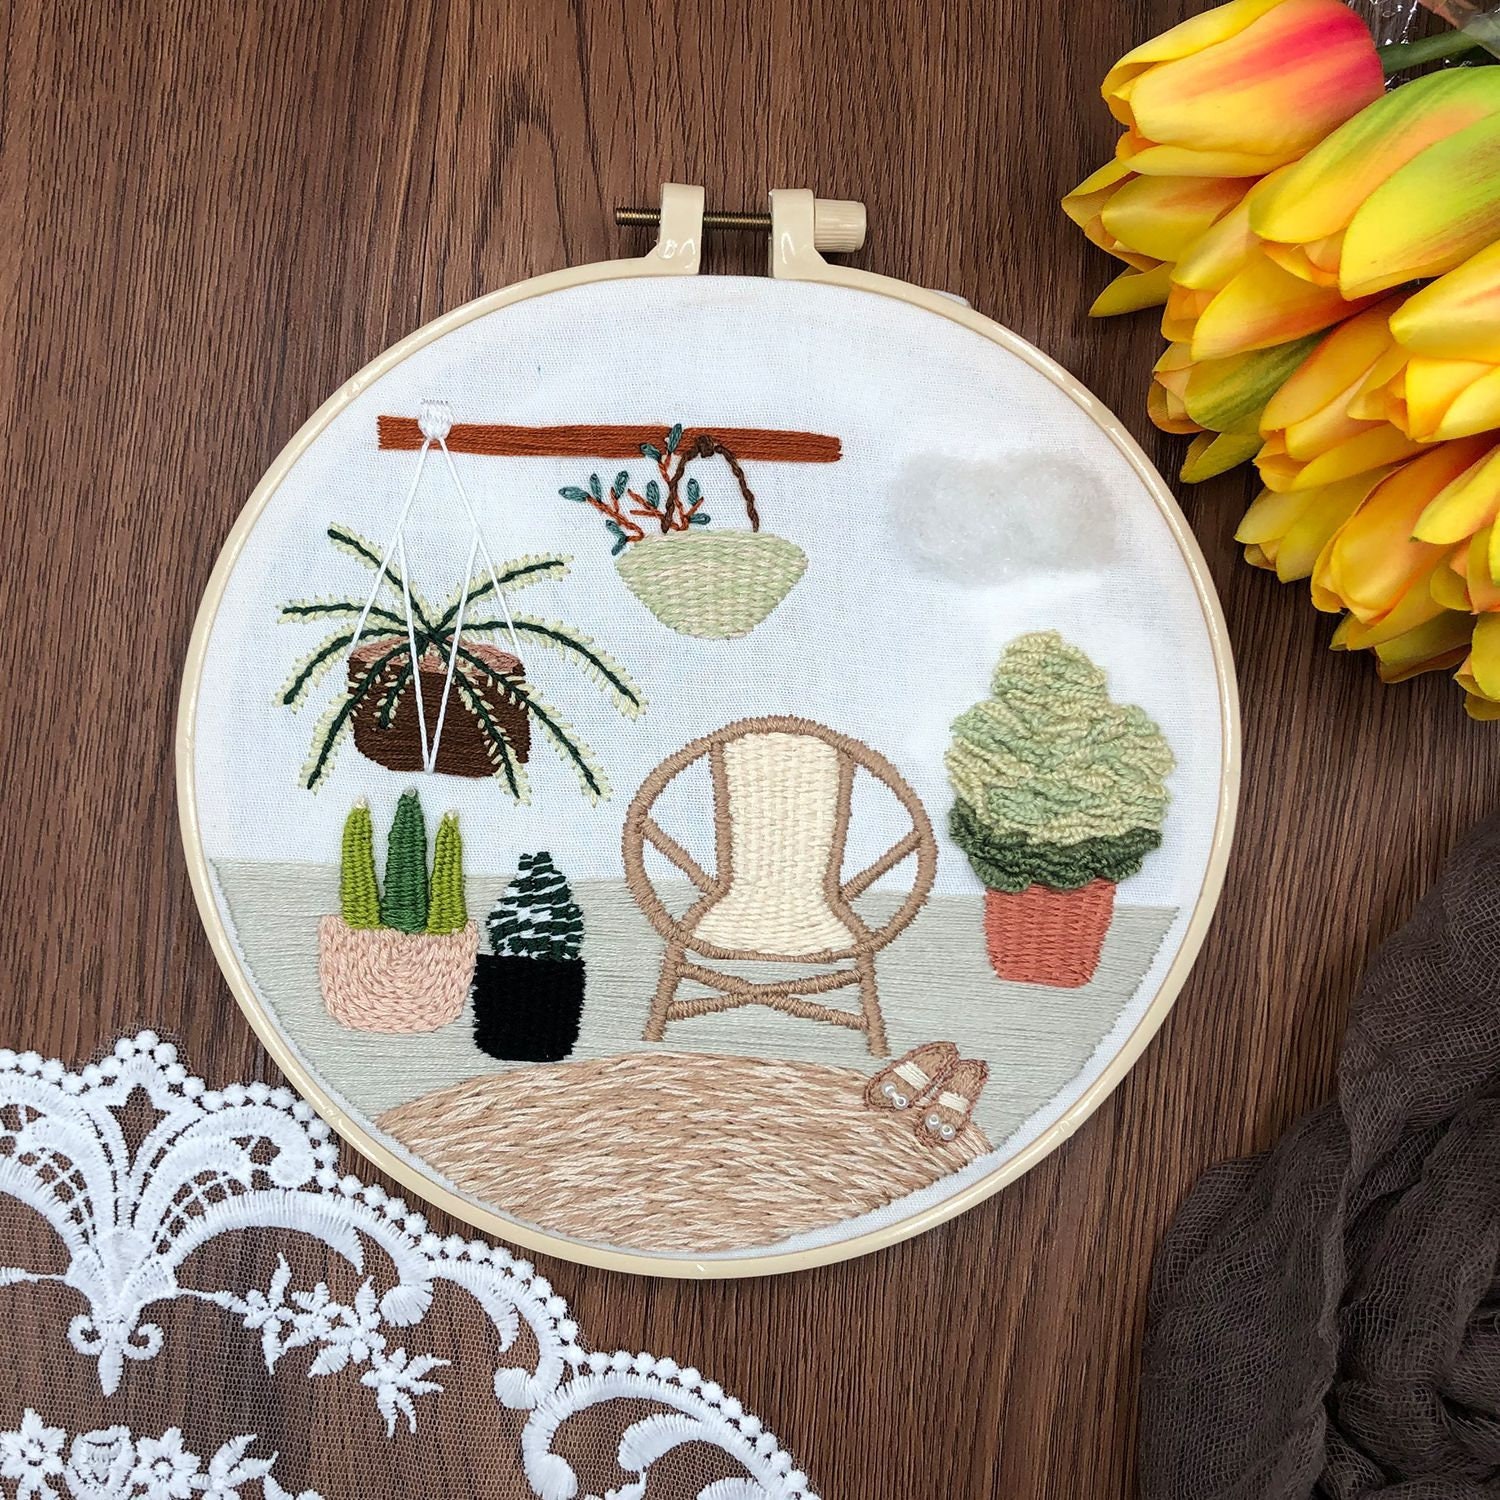 Embroidery Kit, Home Sweet Home, Beginner Embroidery Kit, Hand Embroidery  Pattern, DIY craft kit, Easy Embroidery, Housewarming Gift — I Heart Stitch